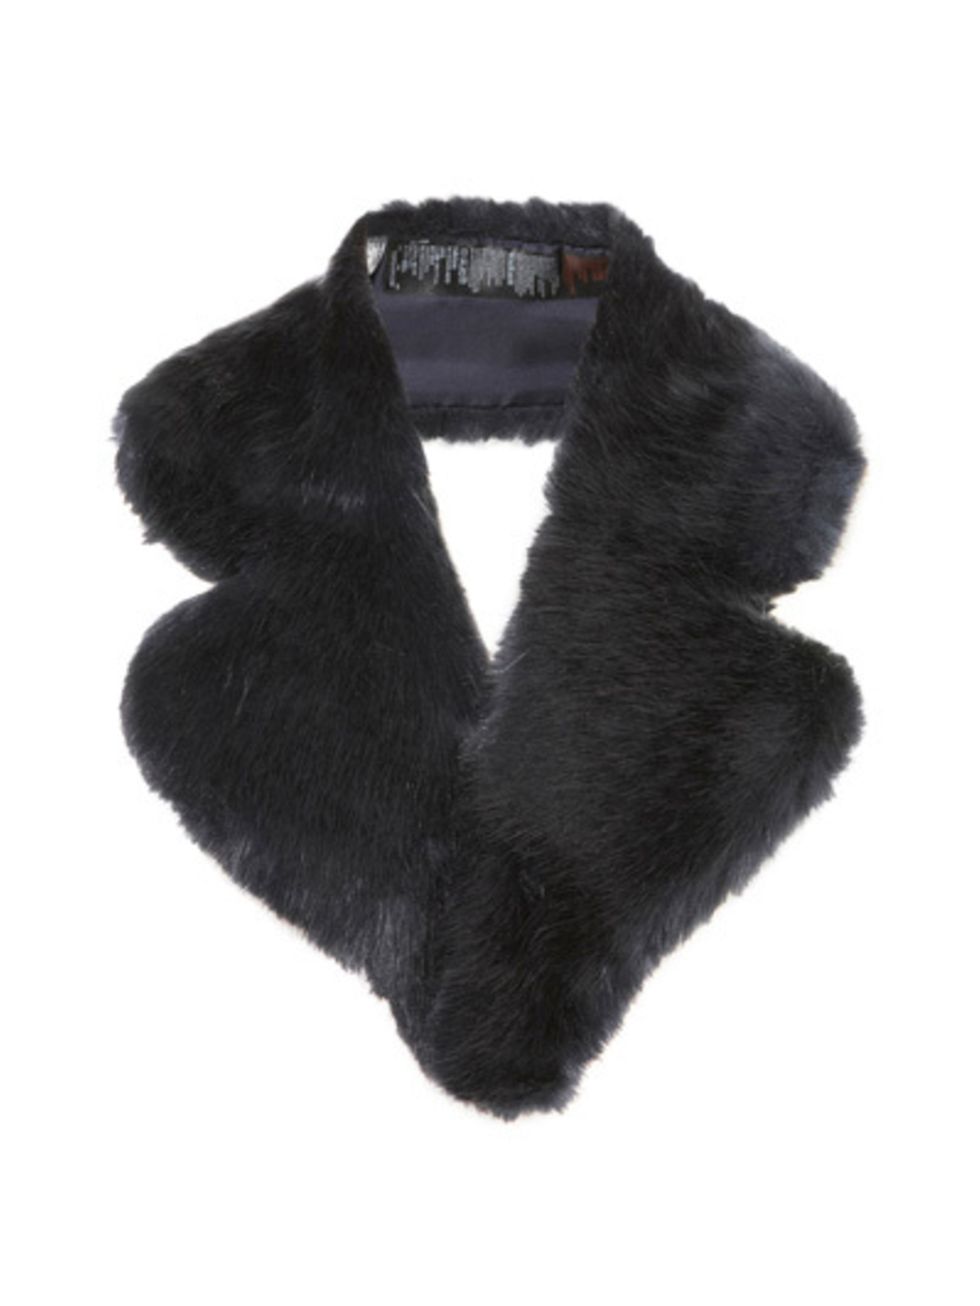 Textile, Neck, Natural material, Fur, Wool, Woolen, Animal product, Stole, 